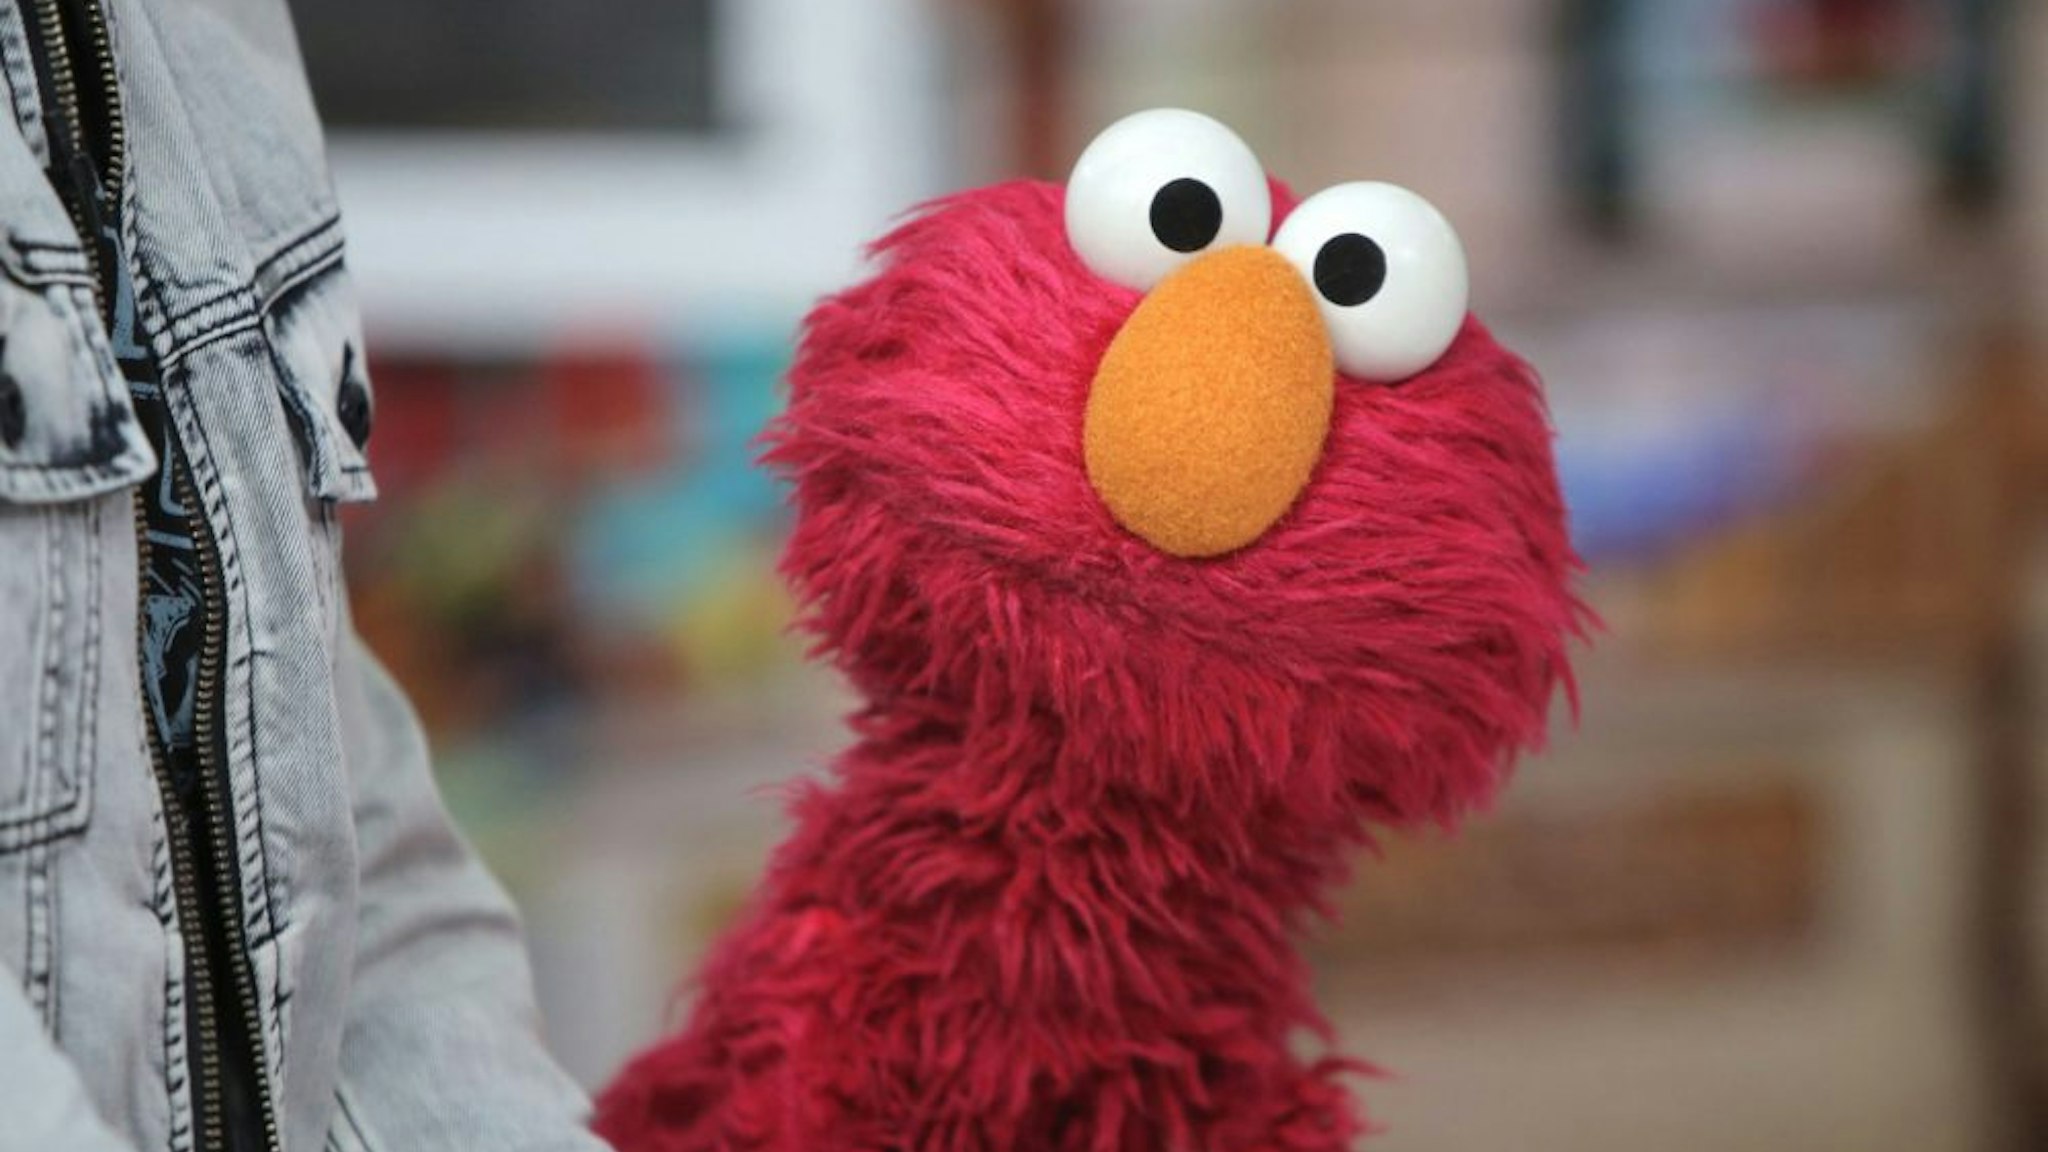 TODAY -- Pictured: Elmo from Sesame Street on Friday, Aug. 4, 2017